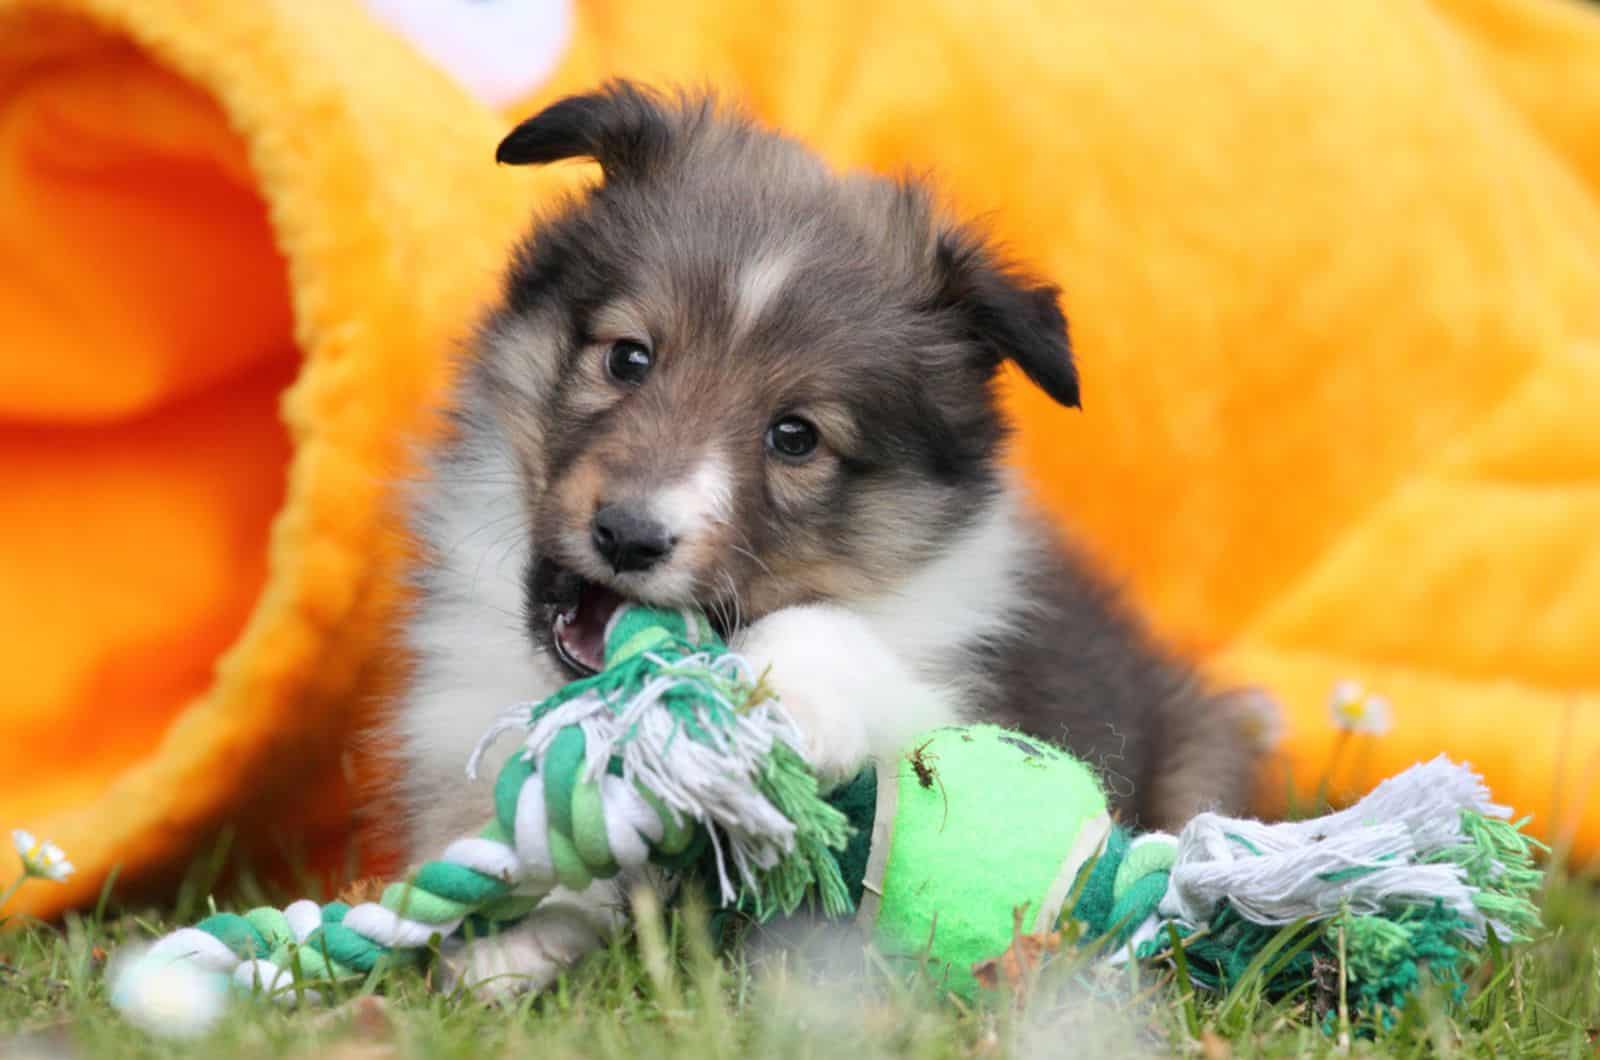 shetland sheepdog puppy playing with a toy